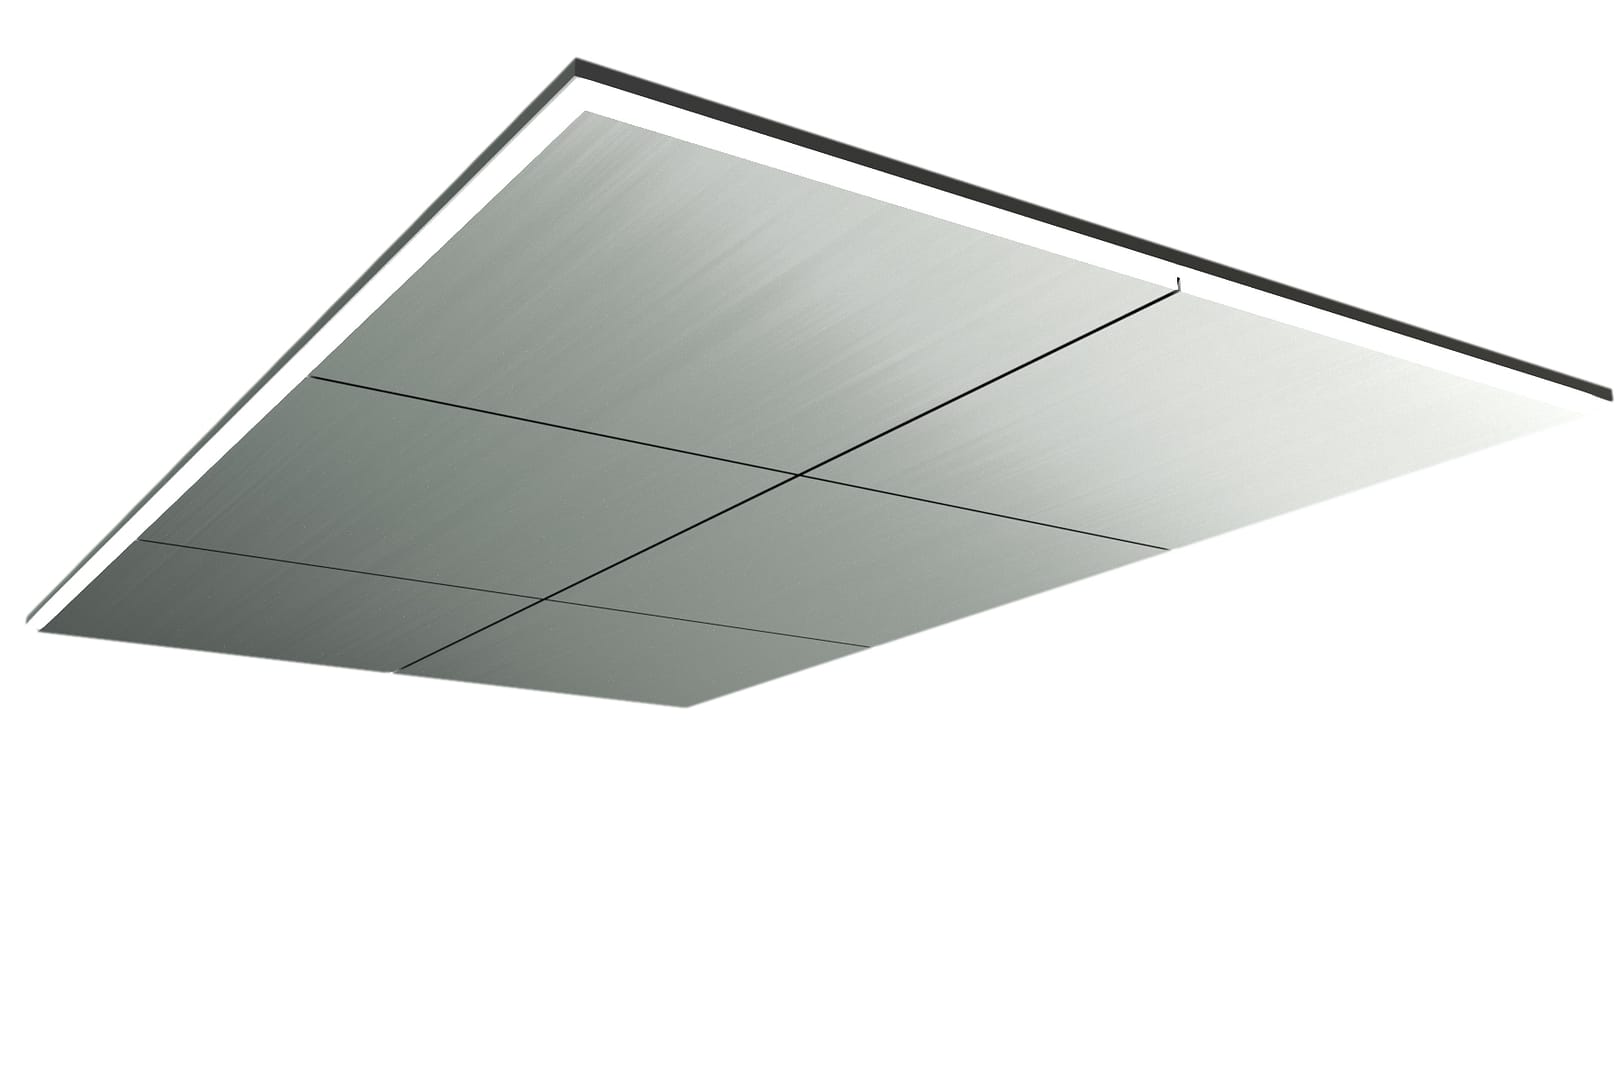 Island ceiling with perimeter dimmable LED strip light, contemporary and discreet. Finished in stainless steel, bronze, plastic laminate, glass...